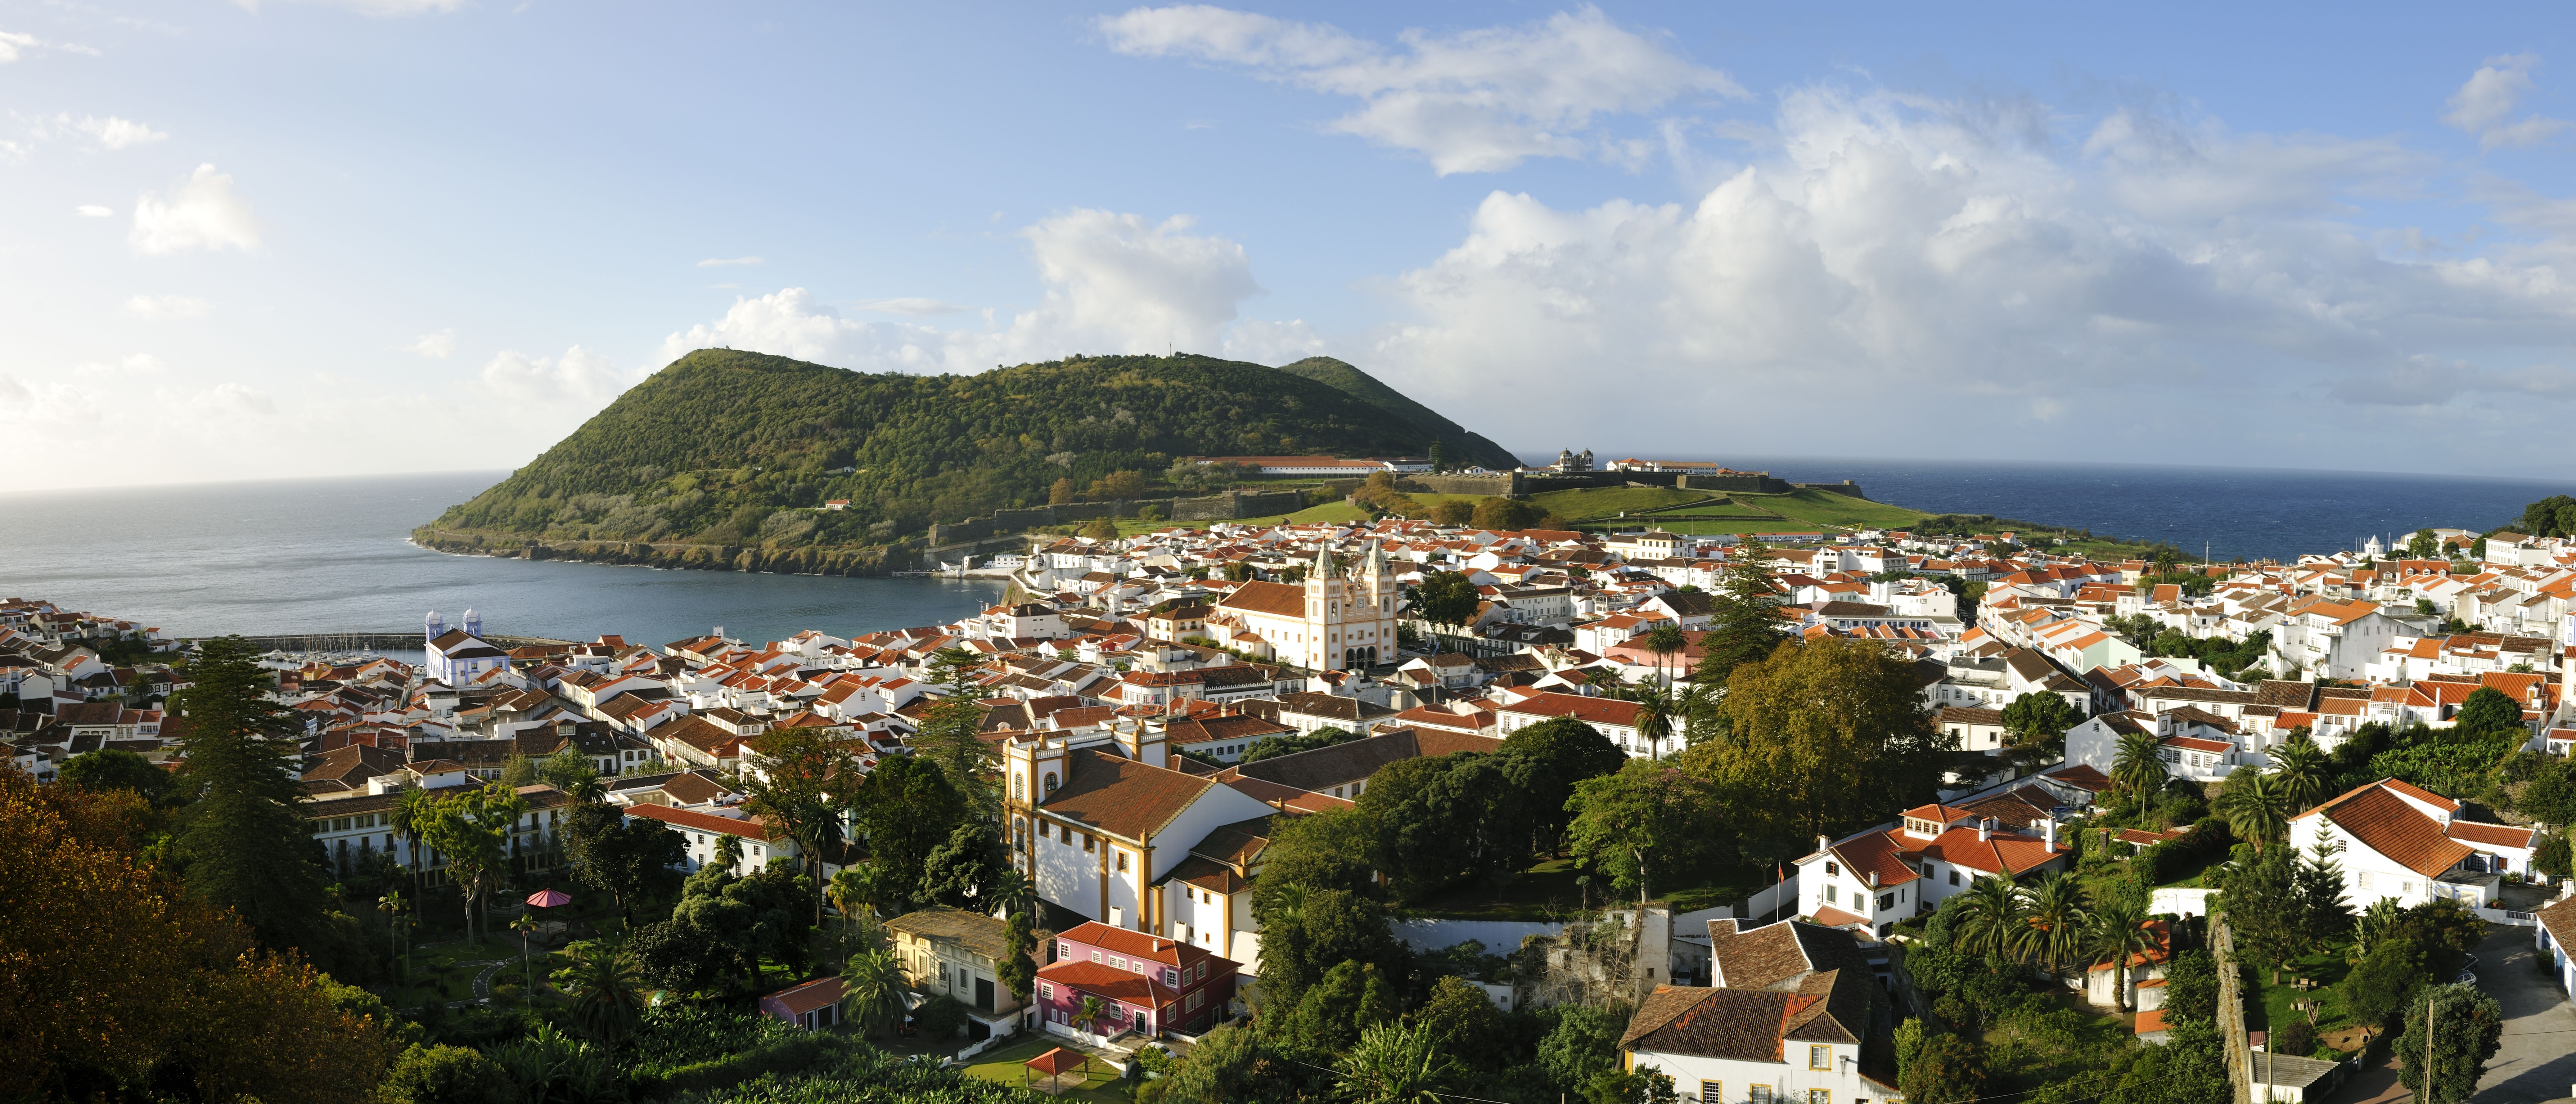 man made, town, azores, portugal, towns